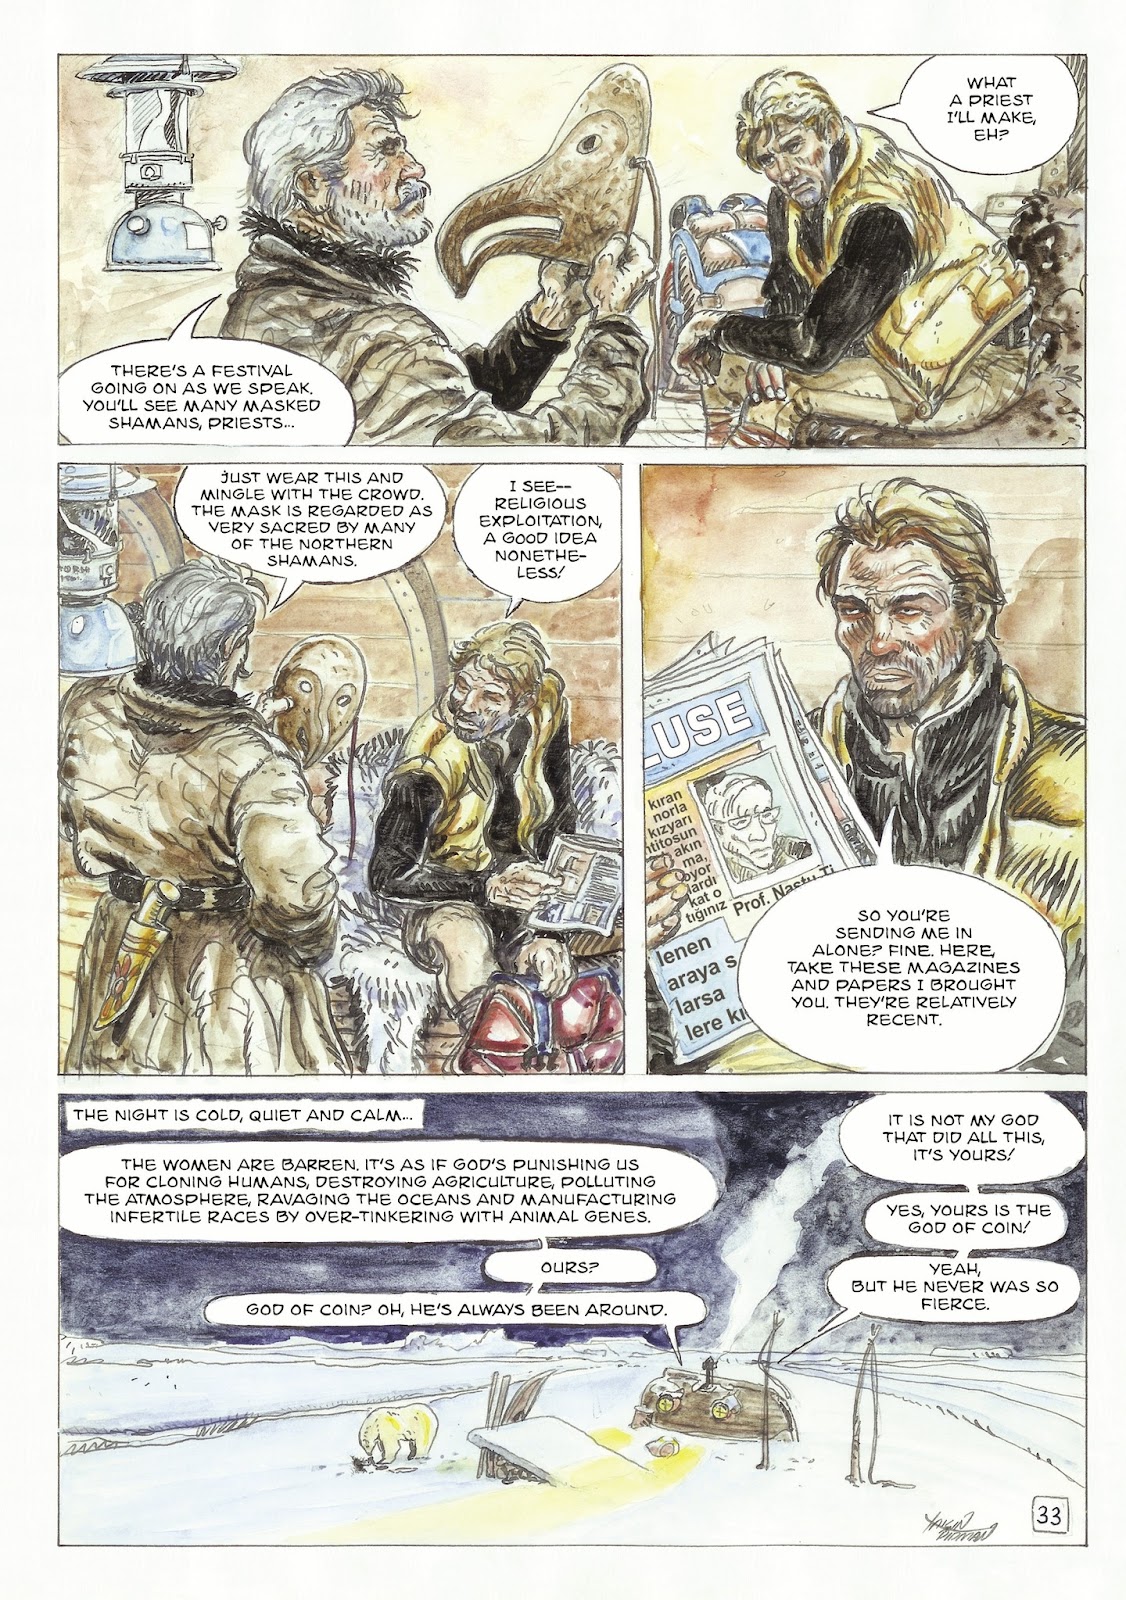 The Man With the Bear issue 1 - Page 35